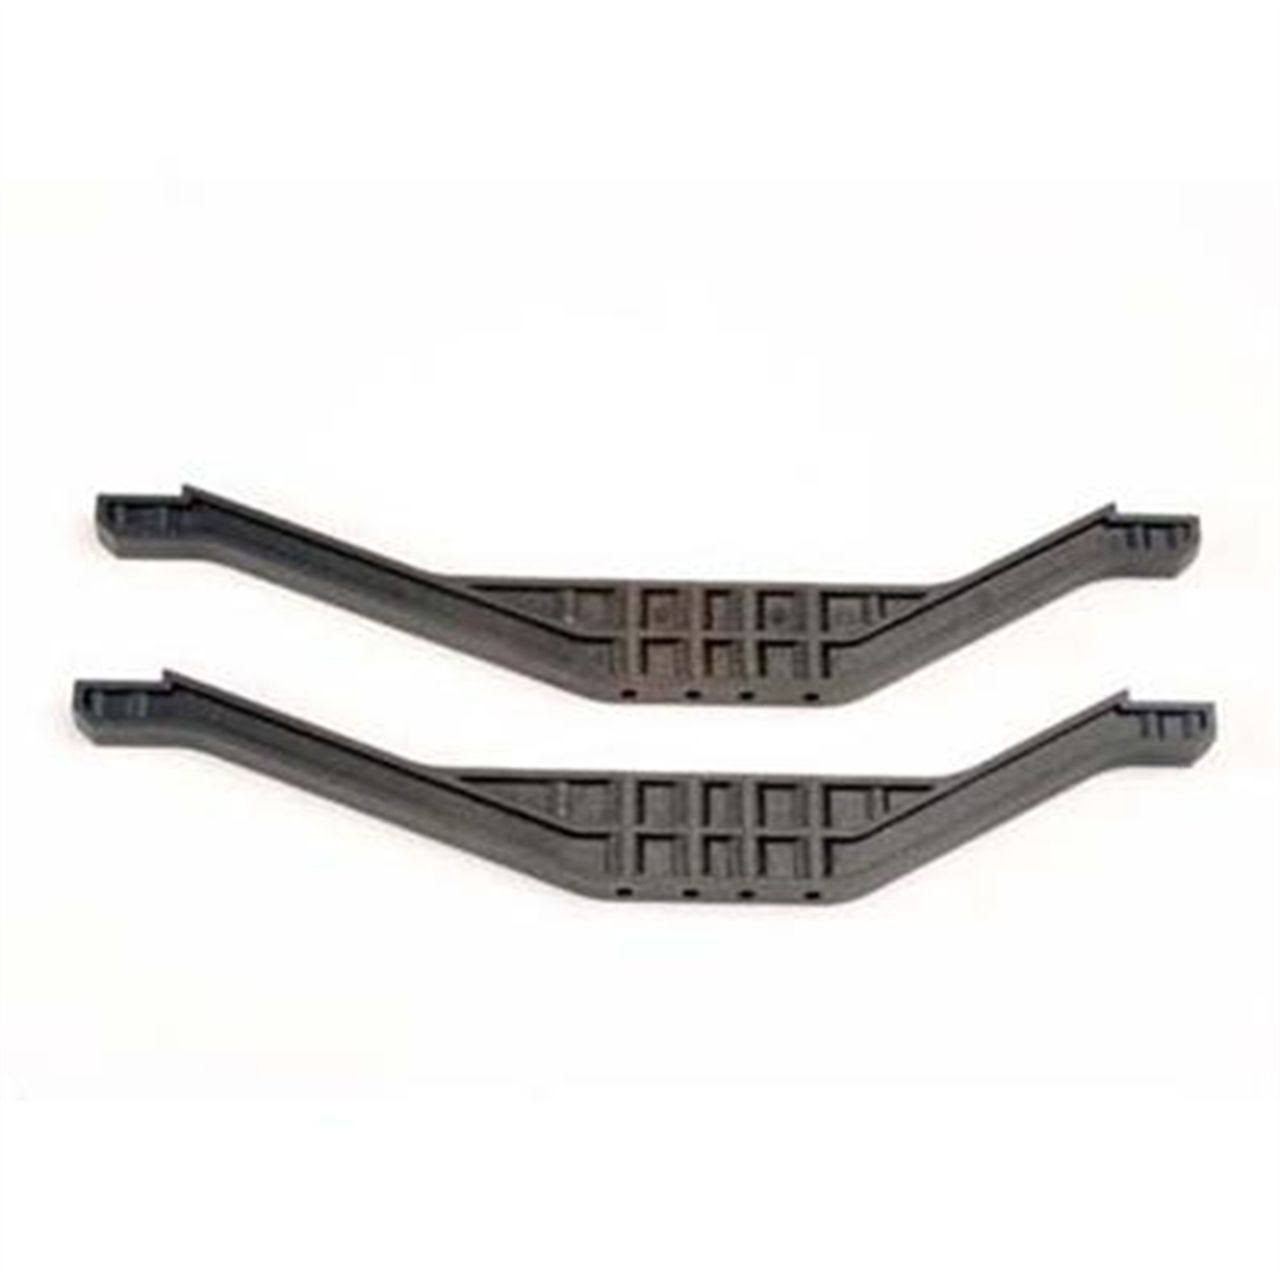 Traxxas Lower Chassis Braces - Black